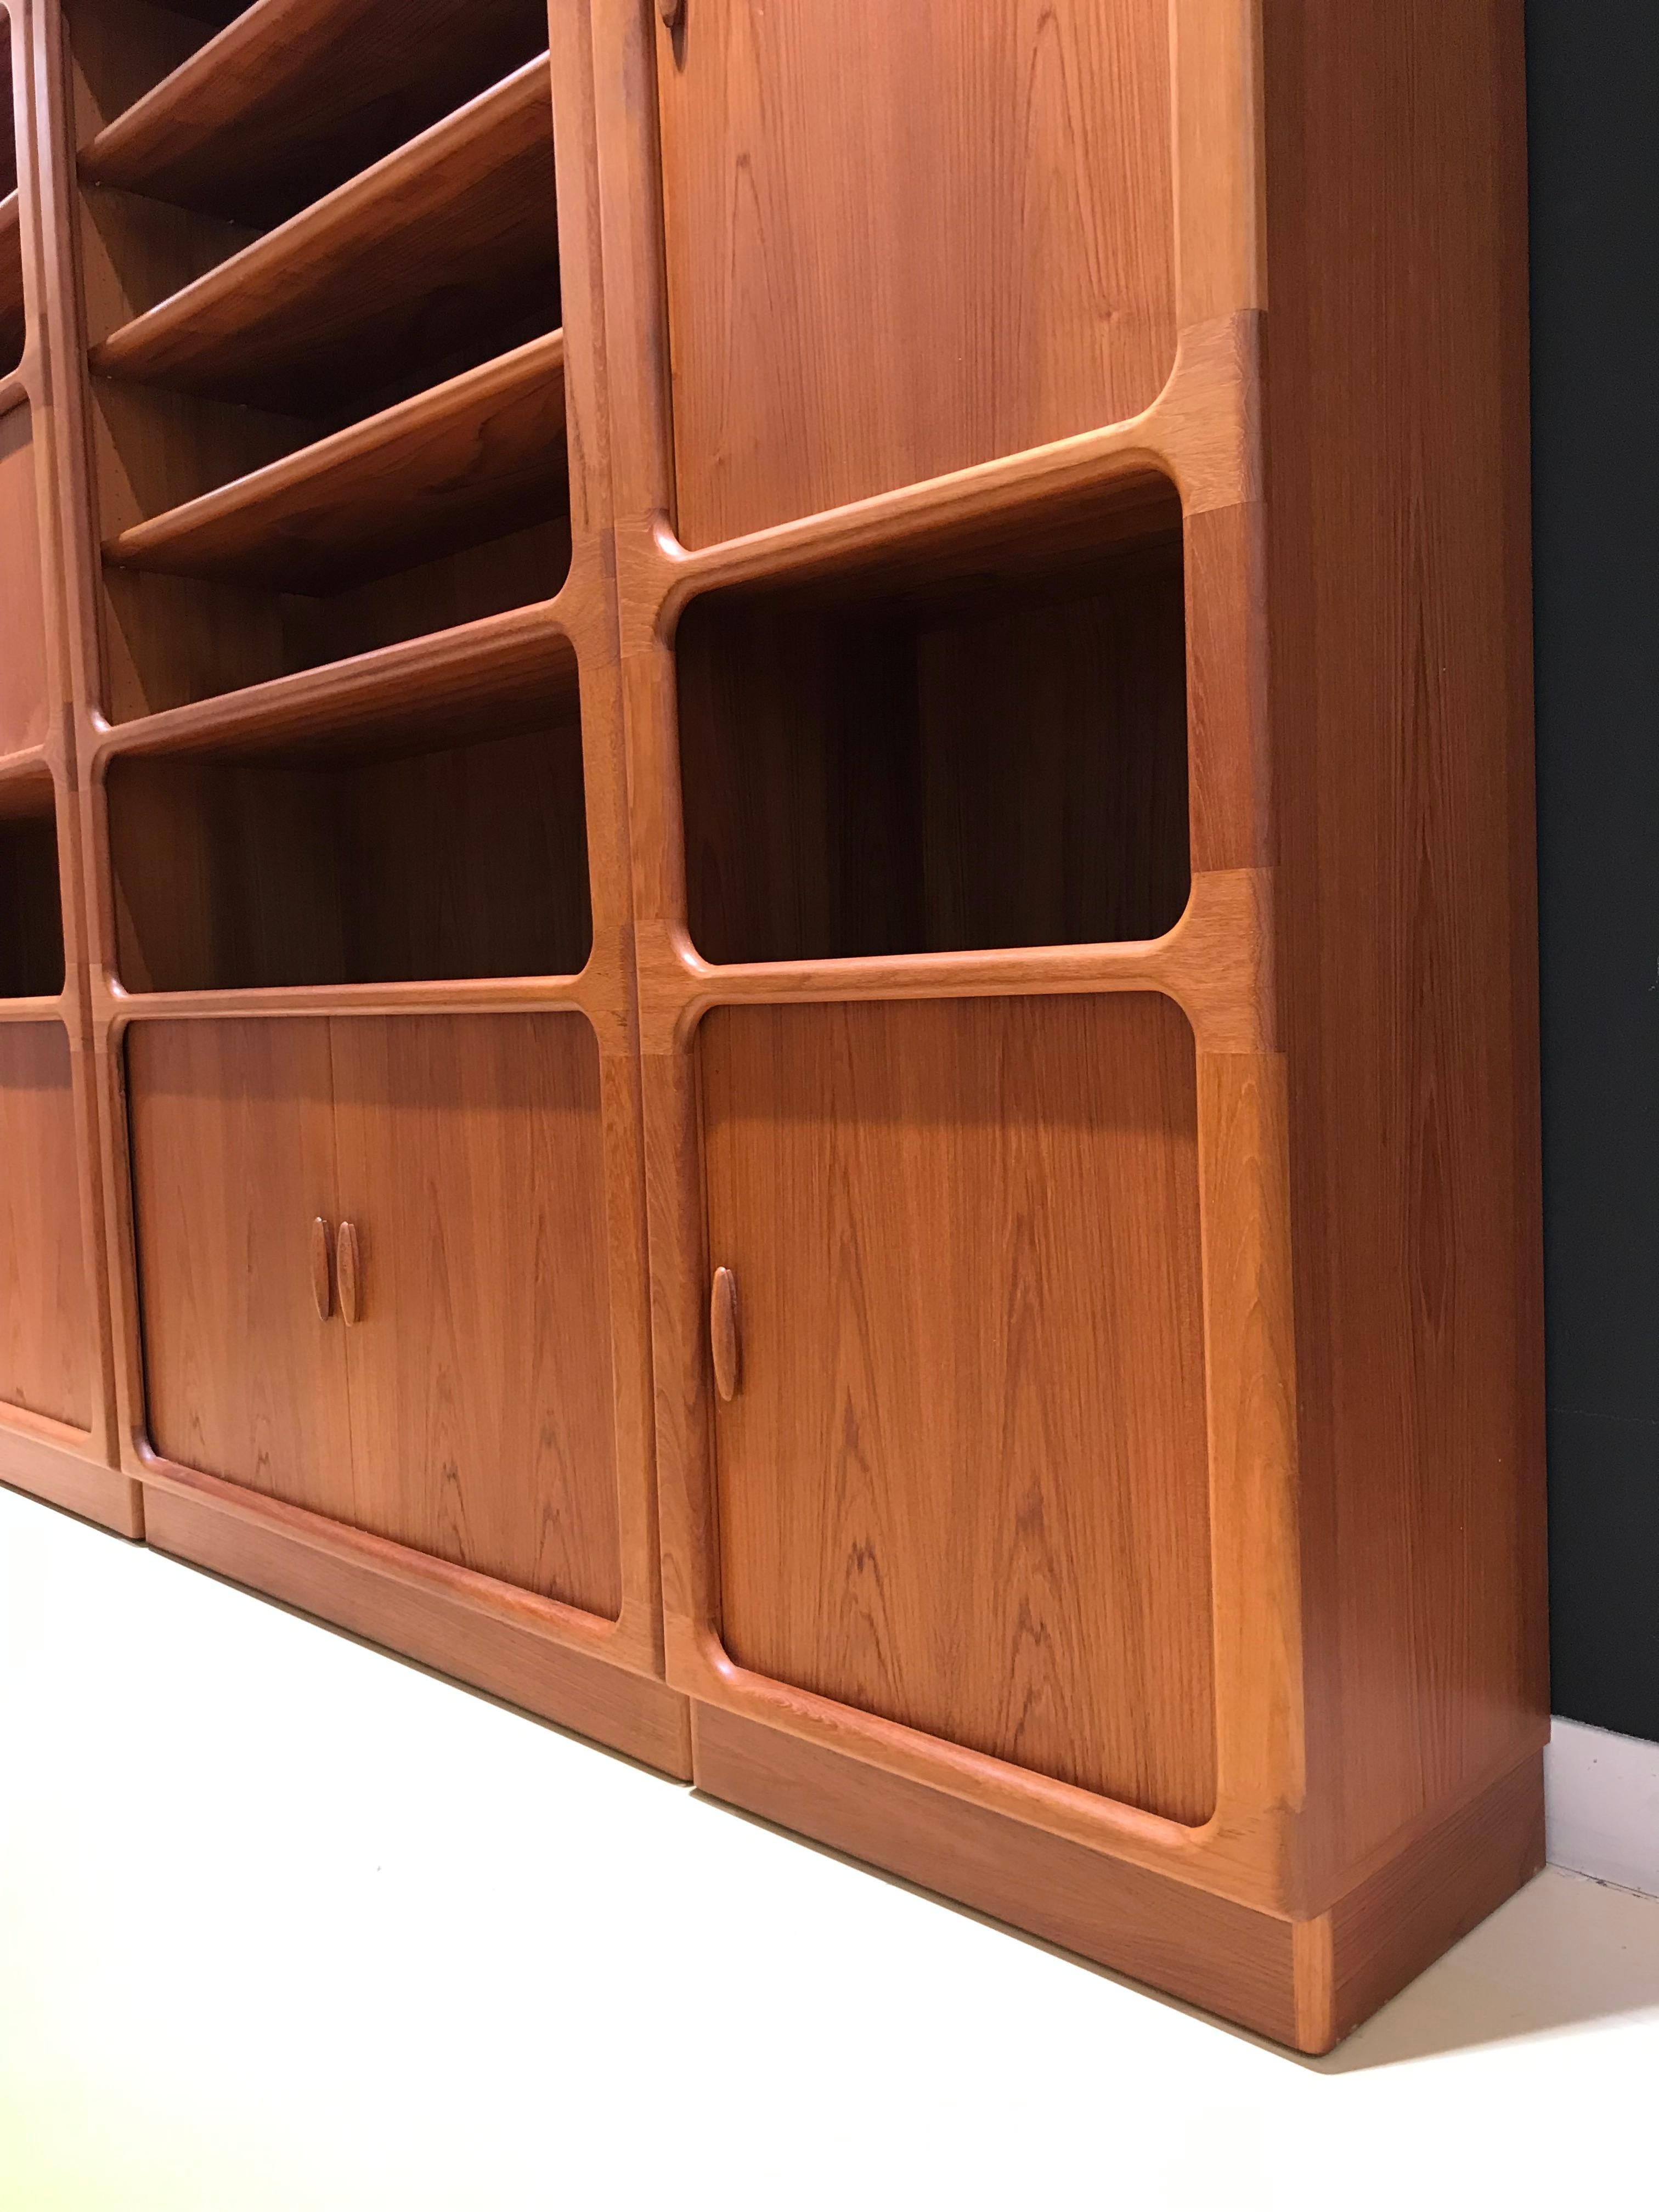 Large Midcentury Danish Teak Wall Unit by Niels Bach for Dyrlund, 1970s For Sale 3